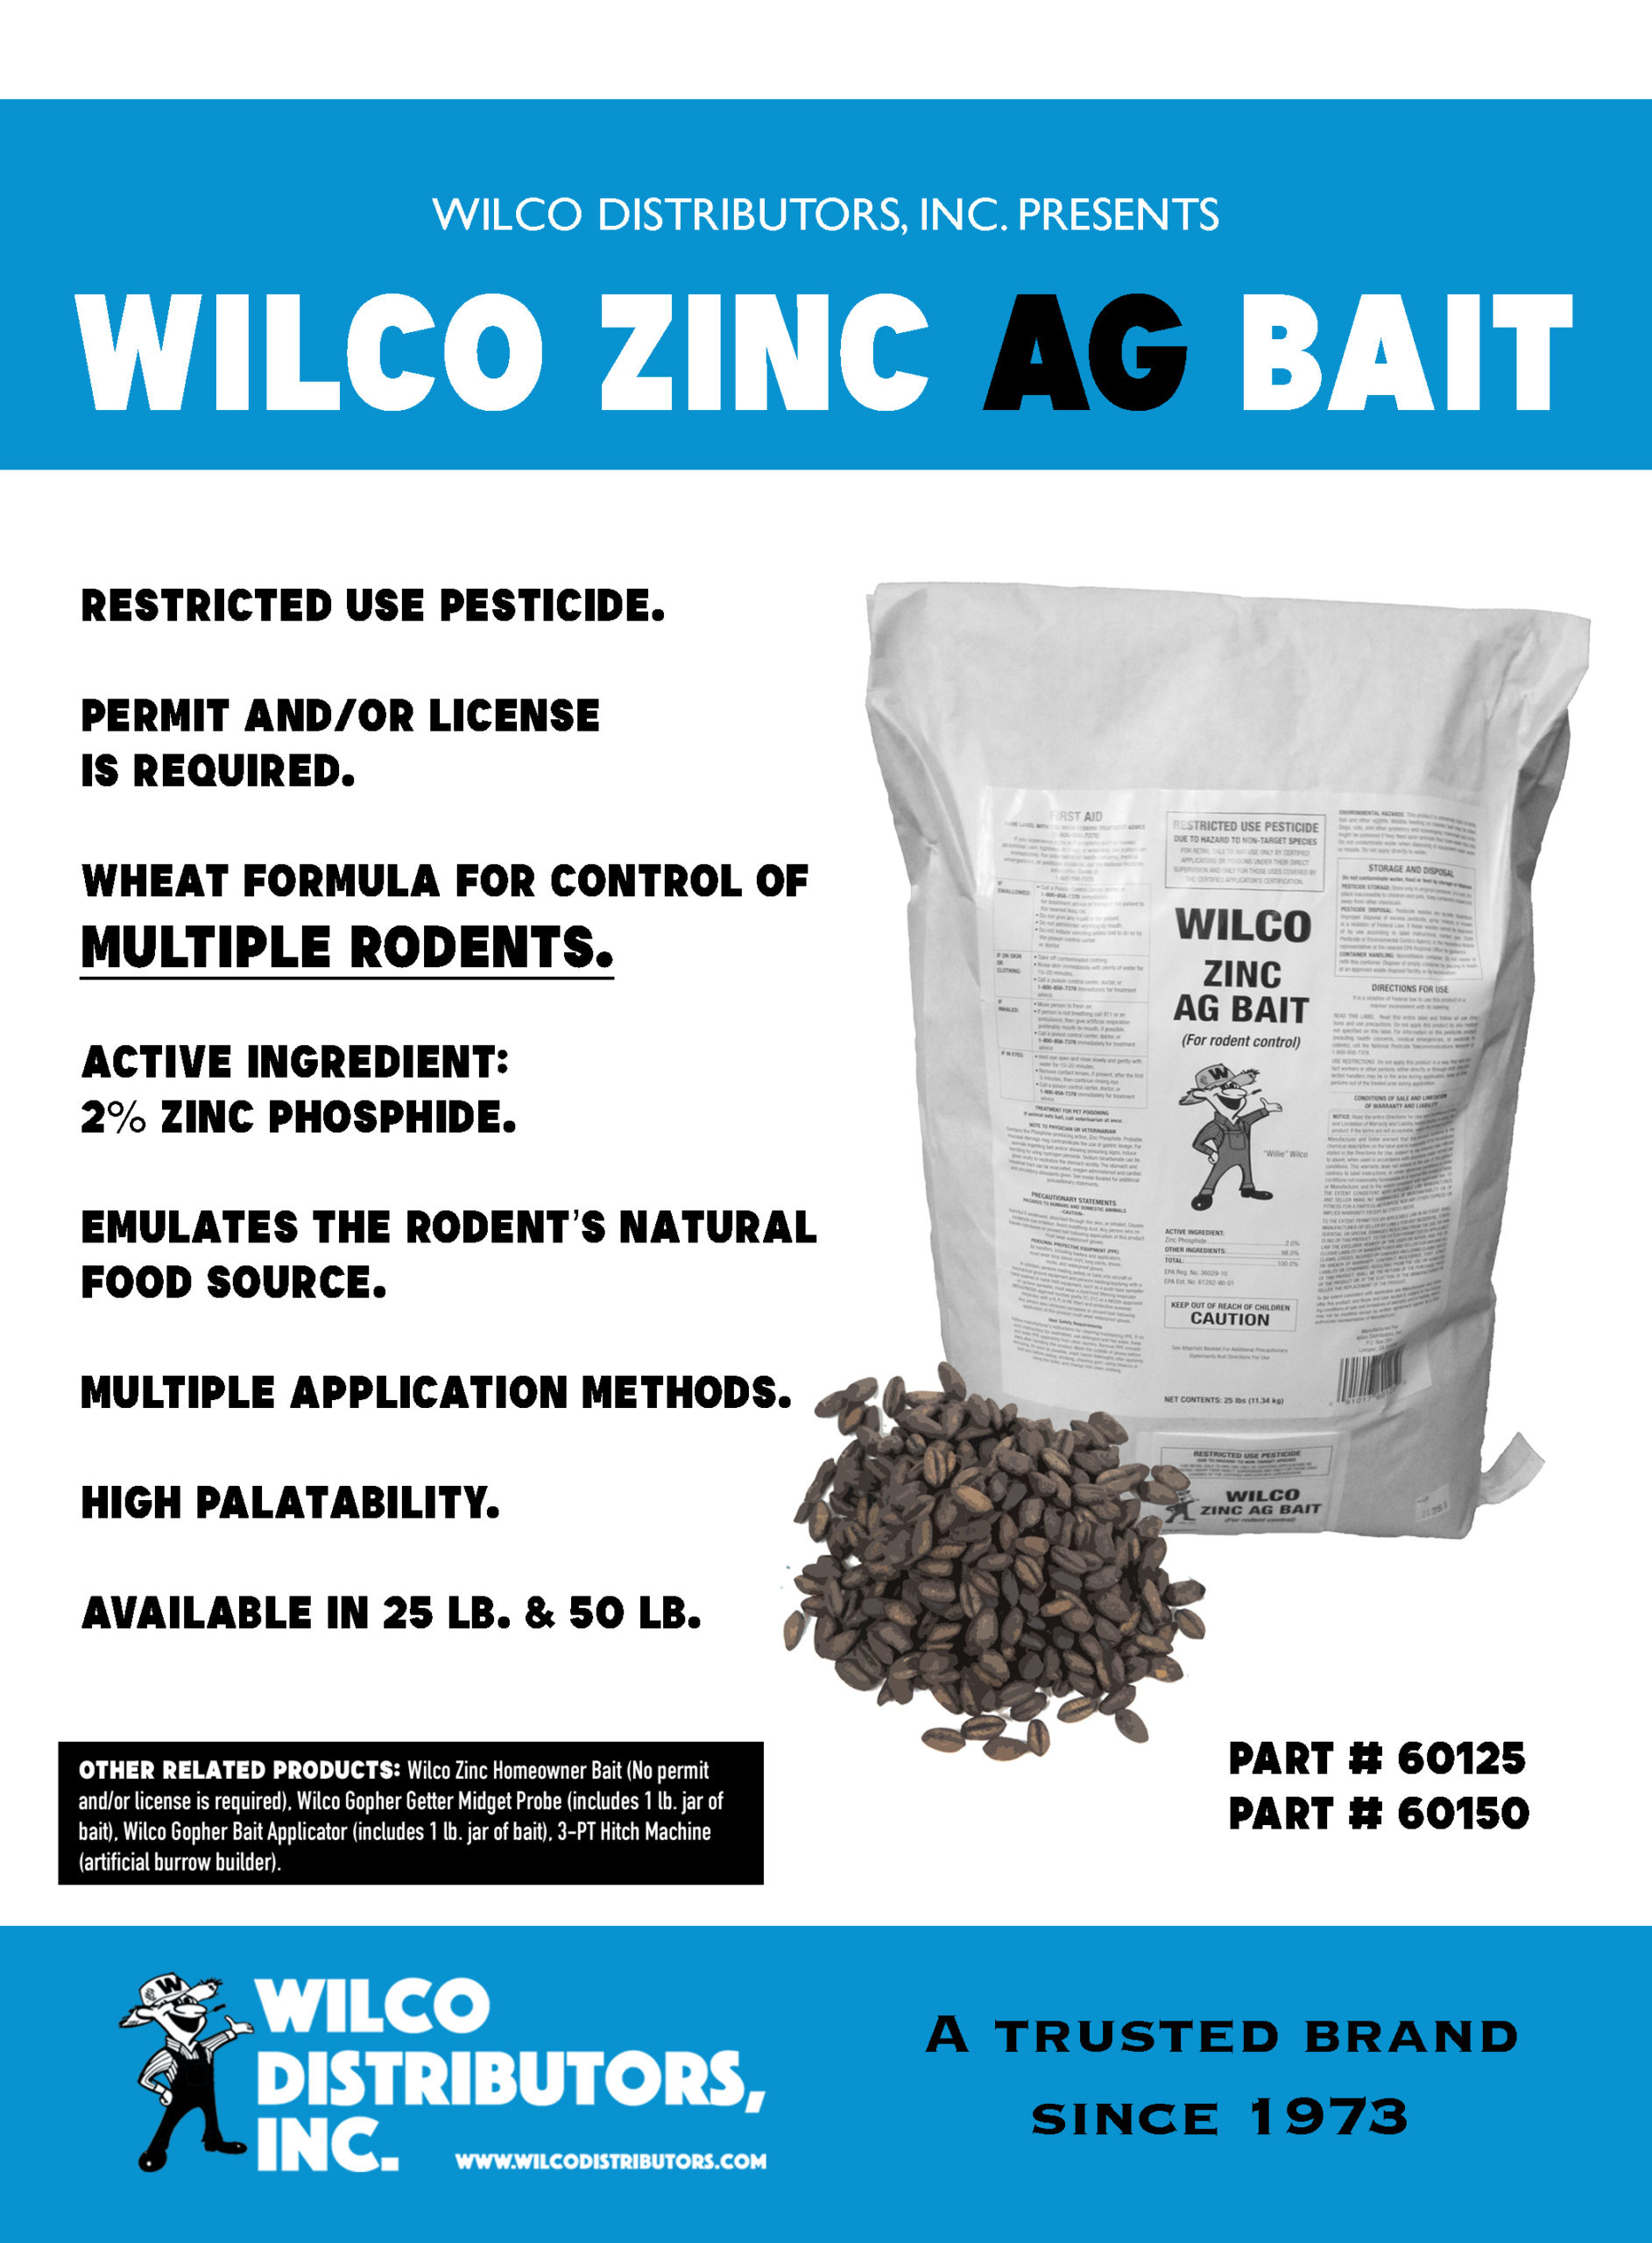 Try our ZP Ag bait today!